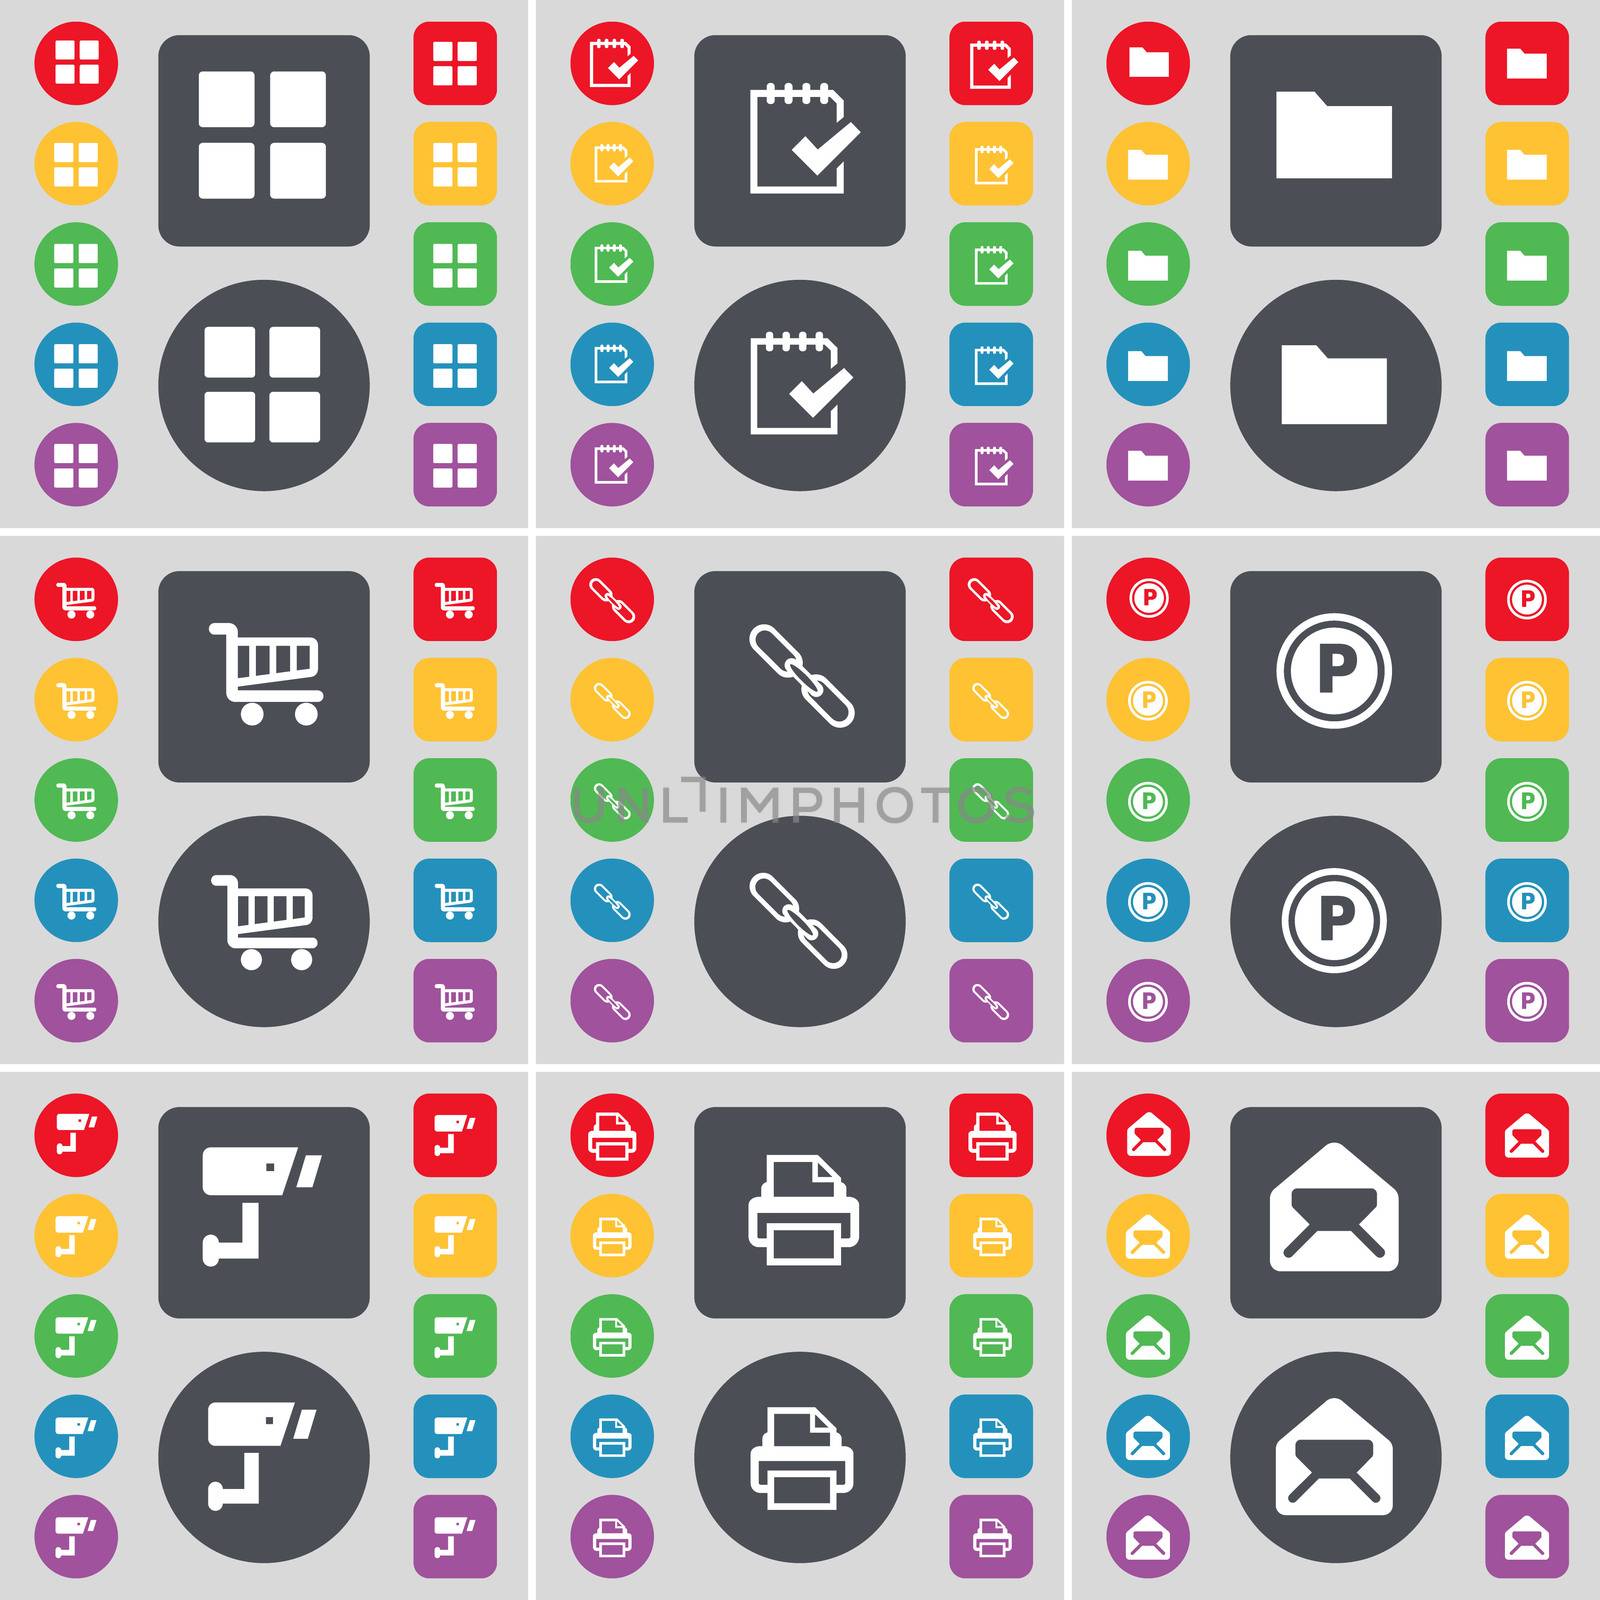 Apps, Survey, Folder, Shopping cart, Link, Parking, CCTV, Printer, Message icon symbol. A large set of flat, colored buttons for your design.  by serhii_lohvyniuk